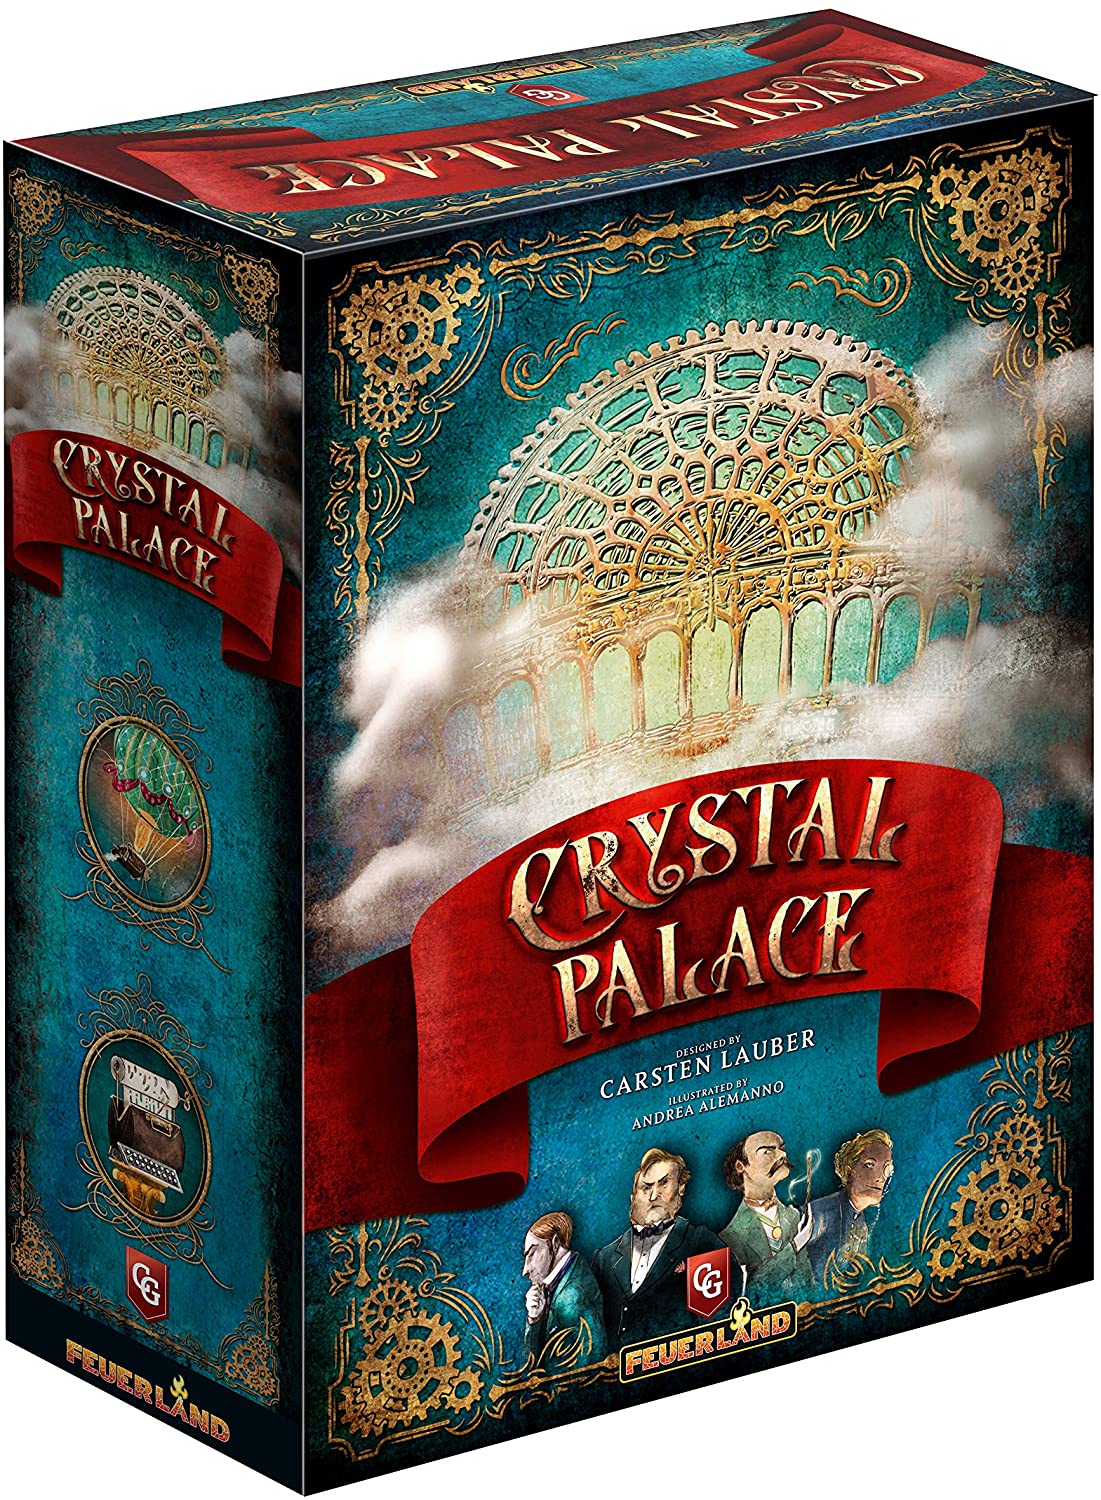 (BSG Certified USED) Crystal Palace